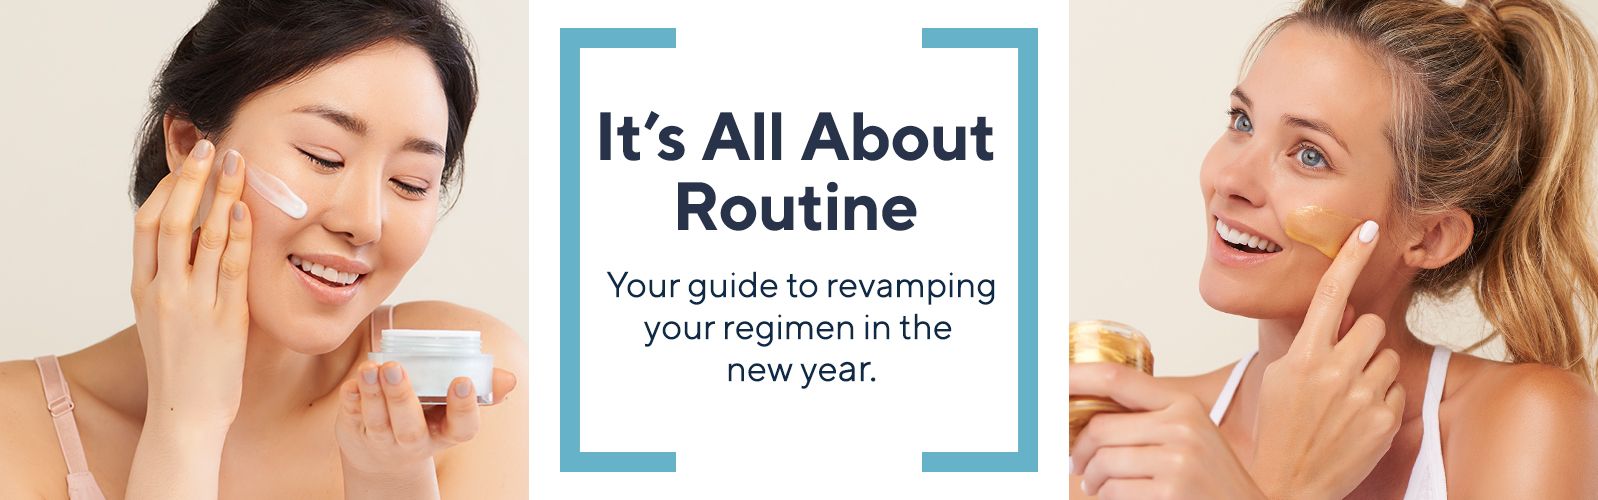 It's All About Routine.  Your guide to revamping your regimen in the new year.